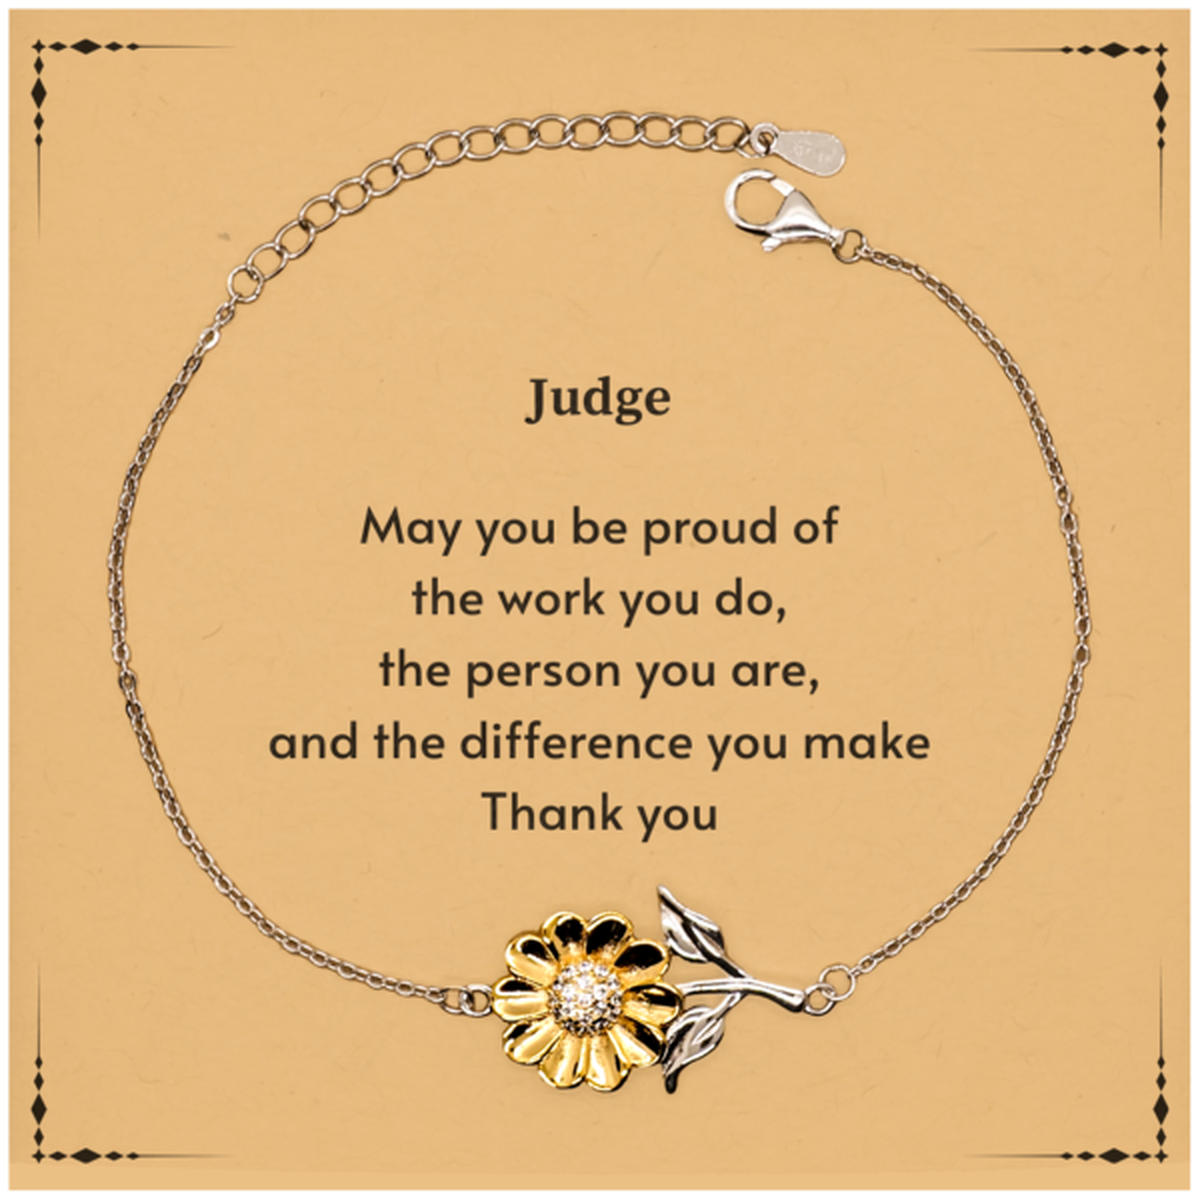 Heartwarming Sunflower Bracelet Retirement Coworkers Gifts for Judge, Judge May You be proud of the work you do, the person you are Gifts for Boss Men Women Friends